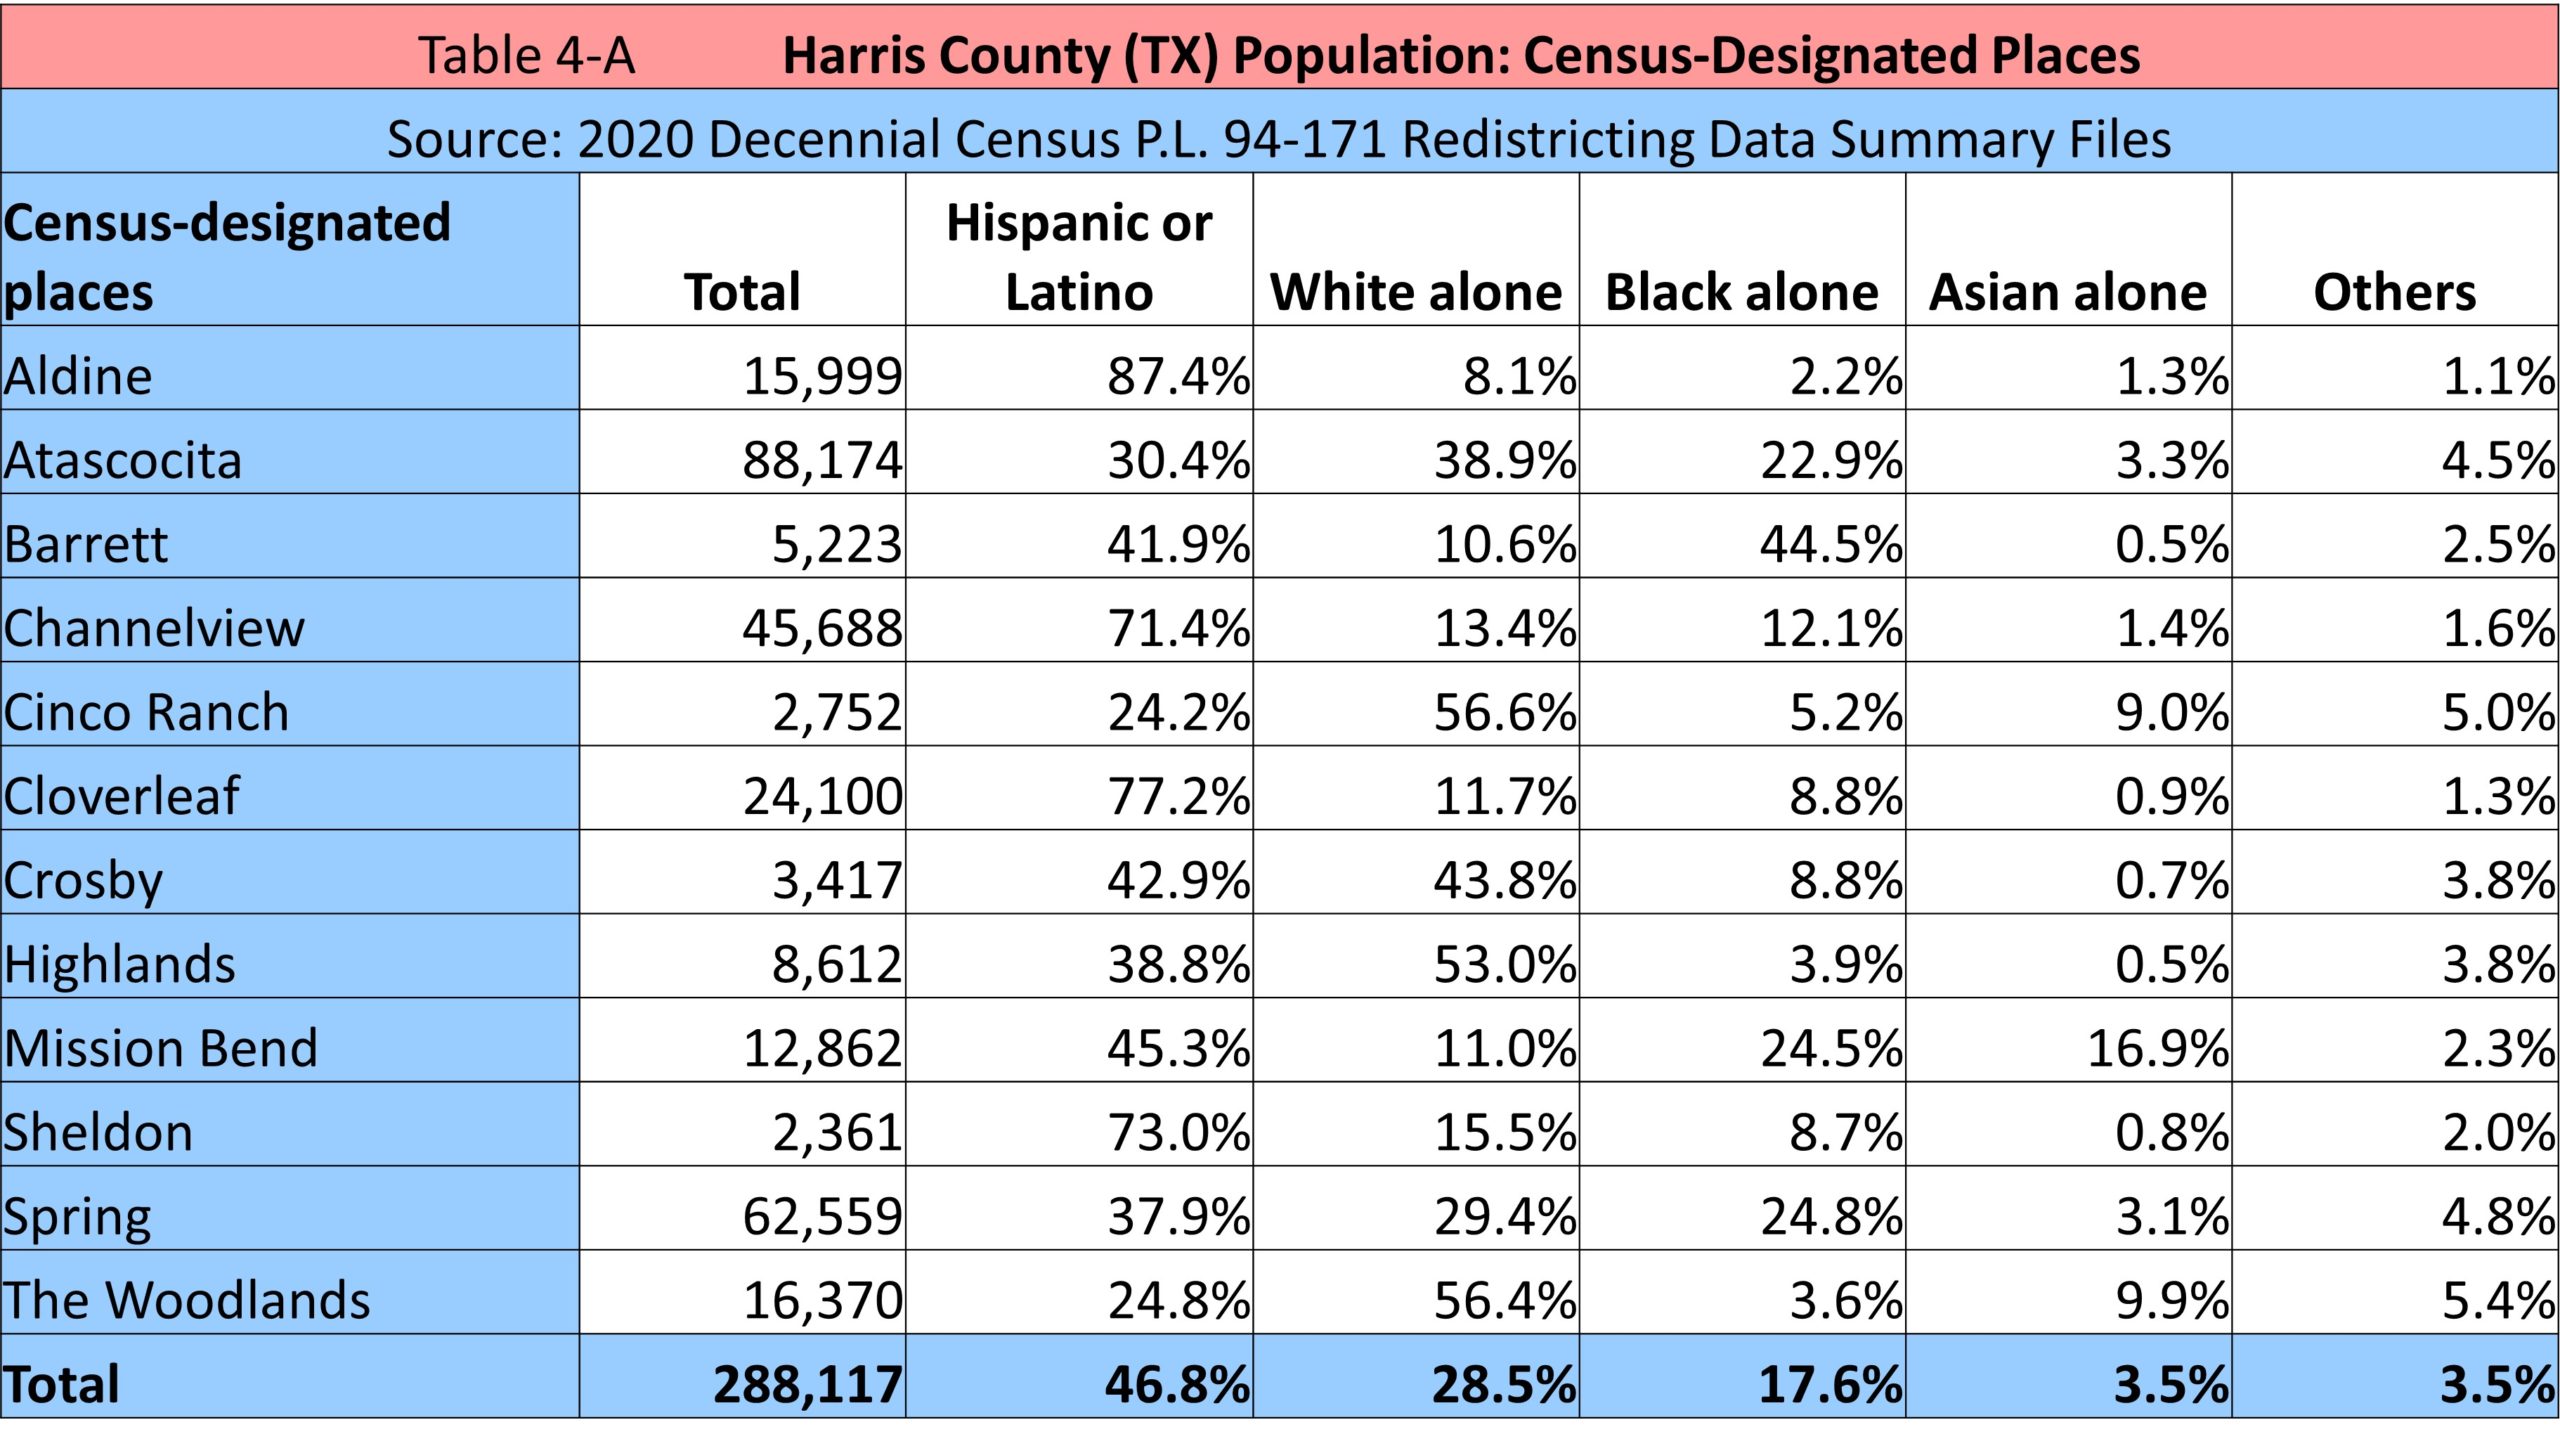 ARE HARRIS COUNTY REGISTERED VOTER POPULATION CHANGES IN 10YEARS